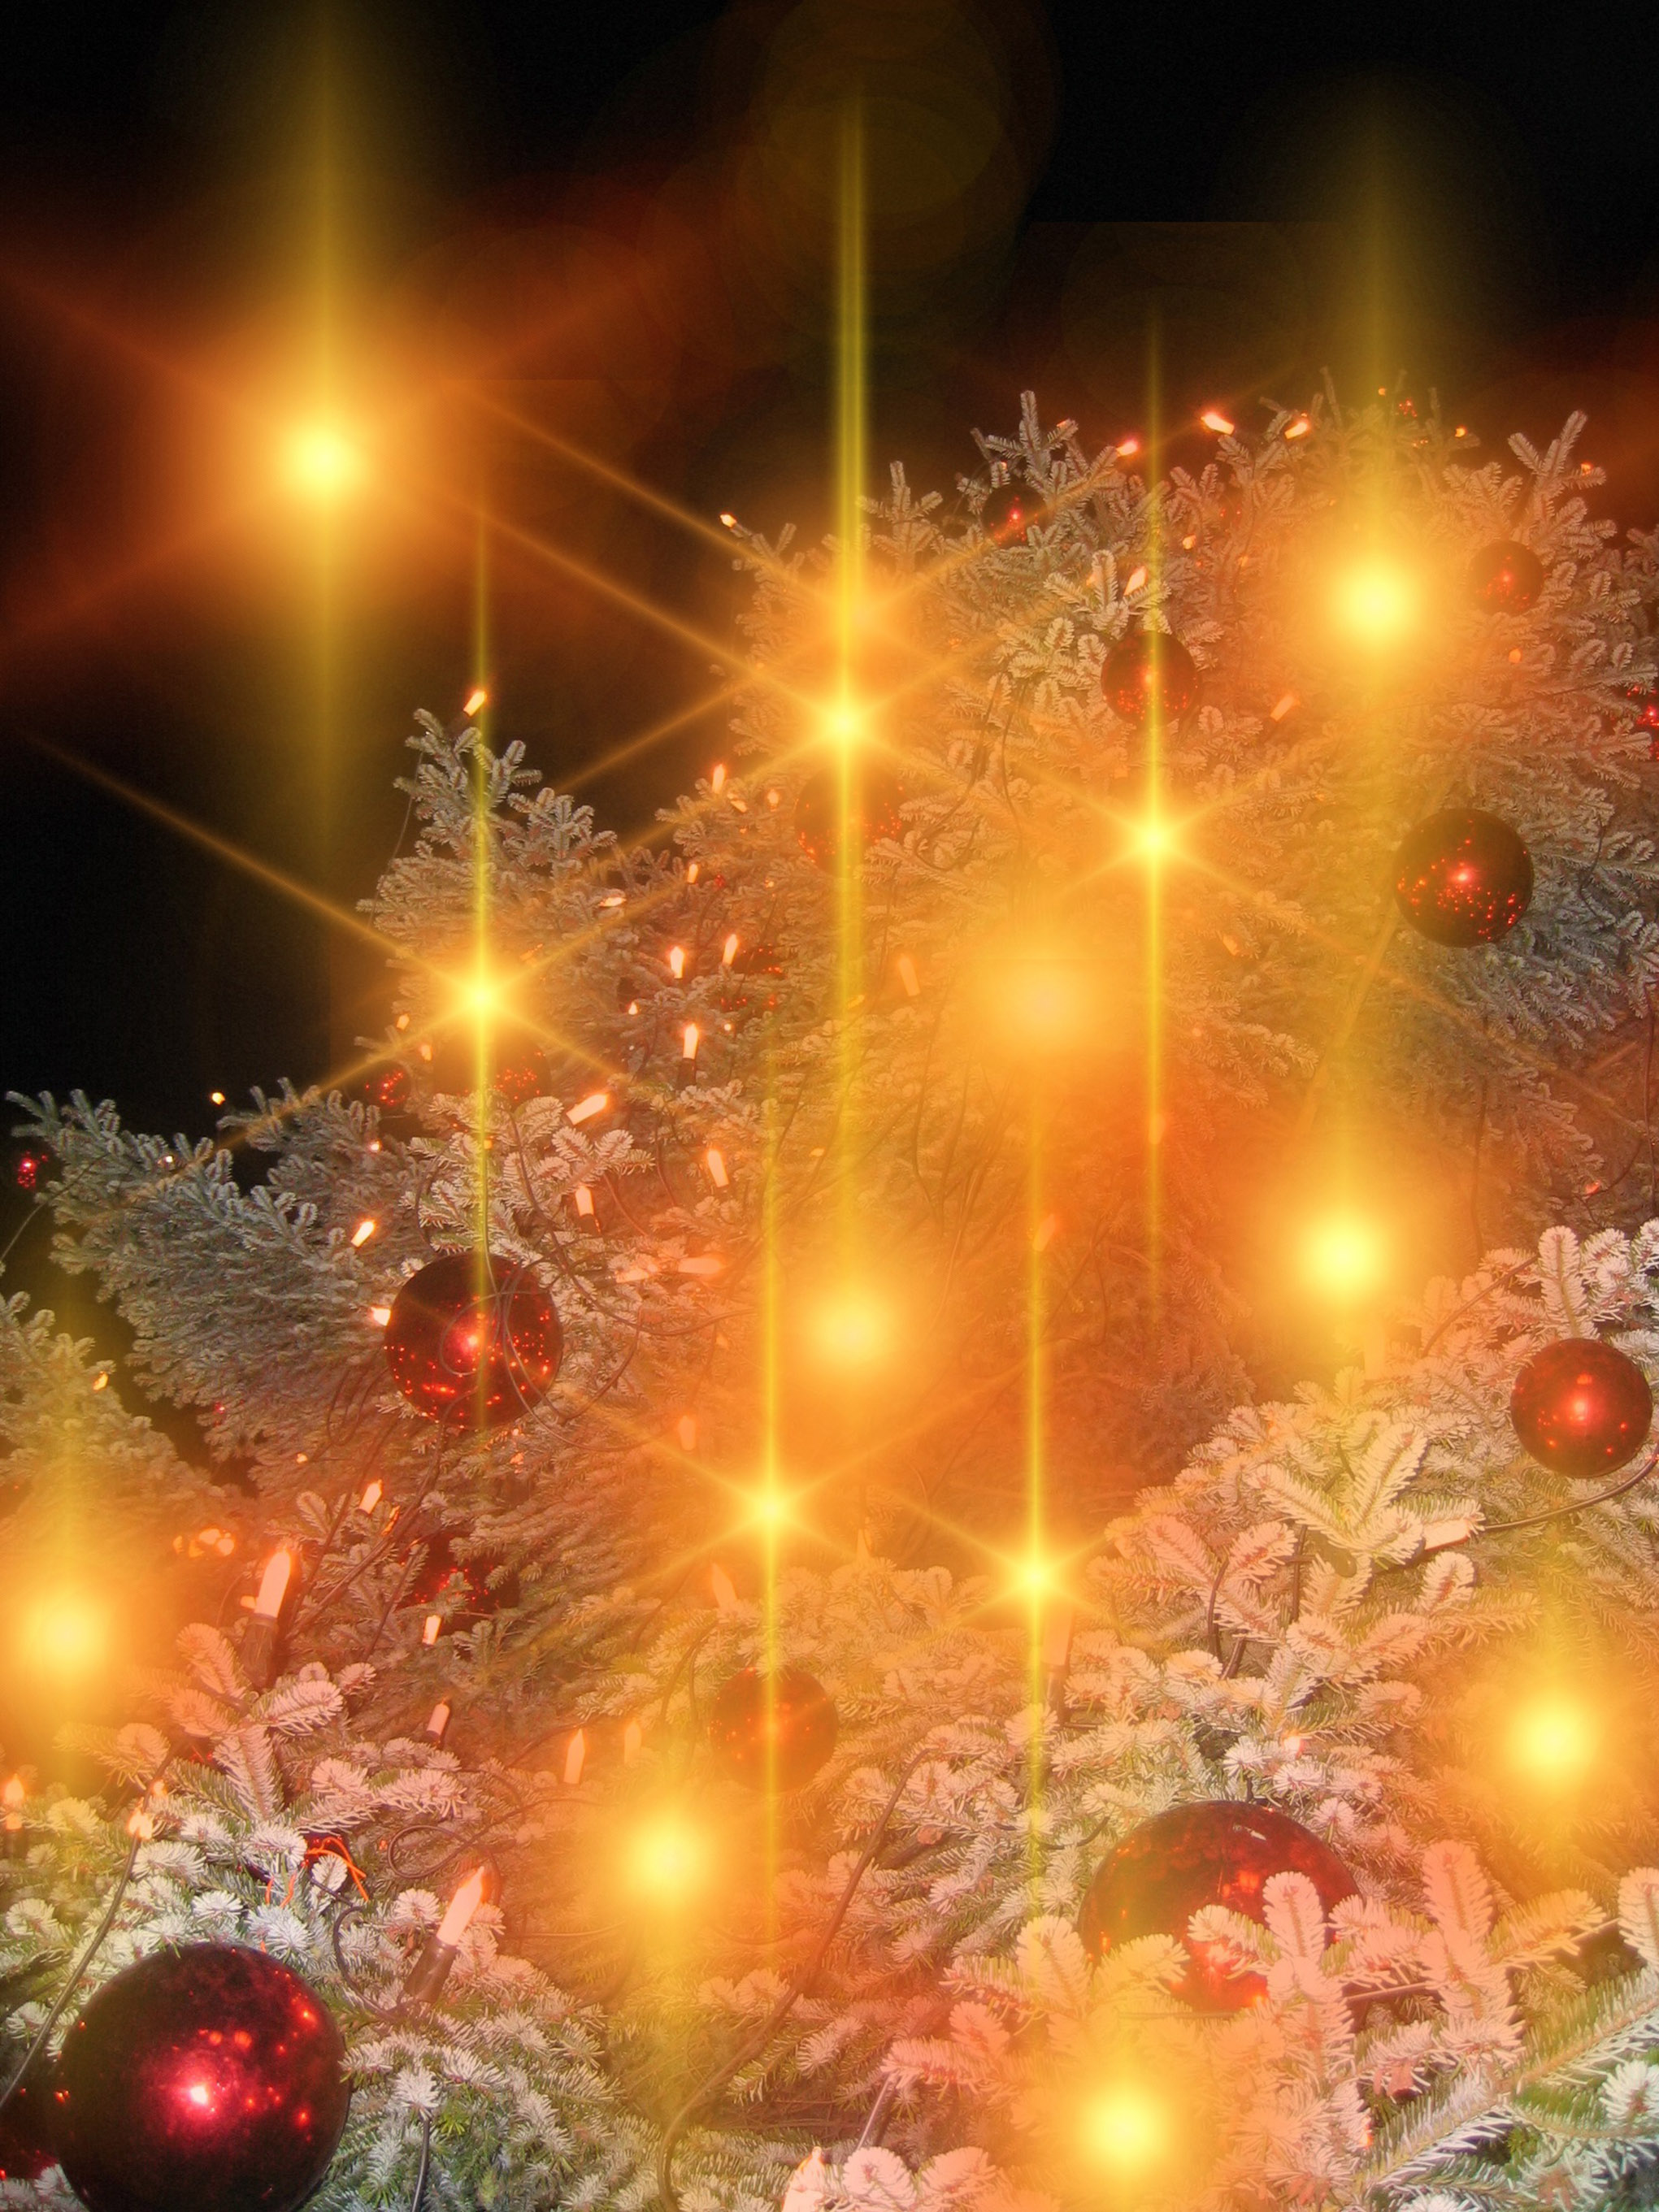 50 Great Free Pictures for Christmas Wallpaper, Background Images and Cards